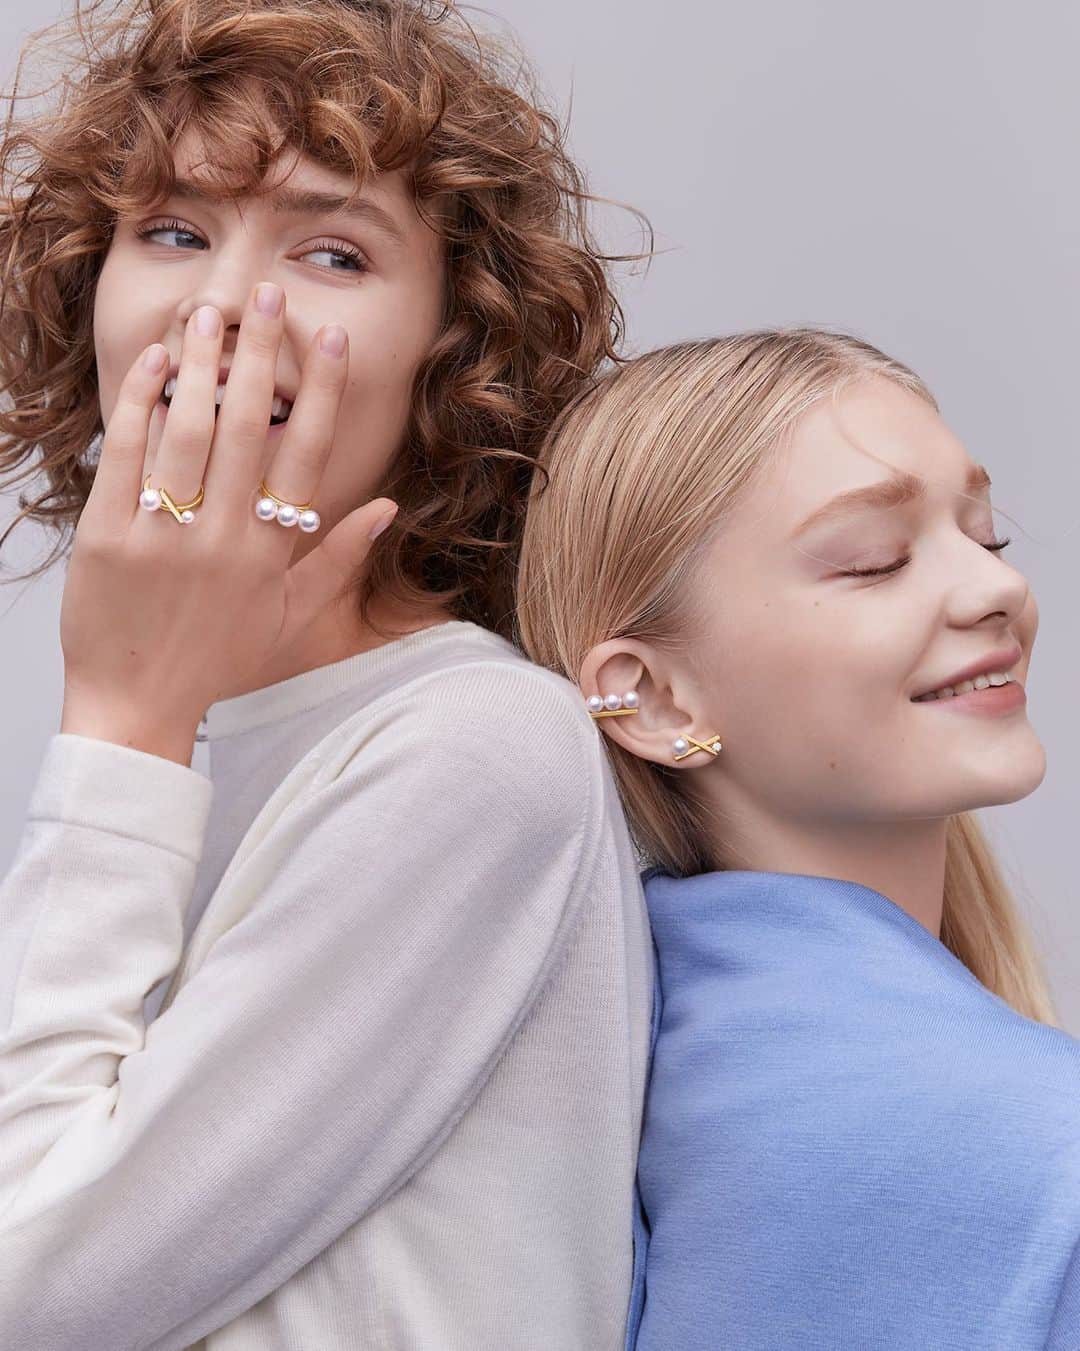 TASAKIのインスタグラム：「Celebrate the holidays with playful pearls! Our 'balance neo' features three pearls in a row, and the 'balance cross' showcases crossed gold bars, sending a charming XOXO message of hugs and kisses. Celebrate this magical season with jewellery designed to share joy.  3珠のパールが存在感を際立たせる「balance neo」や、クロスするゴールドのバーにXOXO (ハグ&キス)の意味を秘めた「balance cross」。 ハッピームードに溢れたジュエリーで聖なるシーズンを祝福して。  #TASAKI #Holiday #TASAKIbalance」